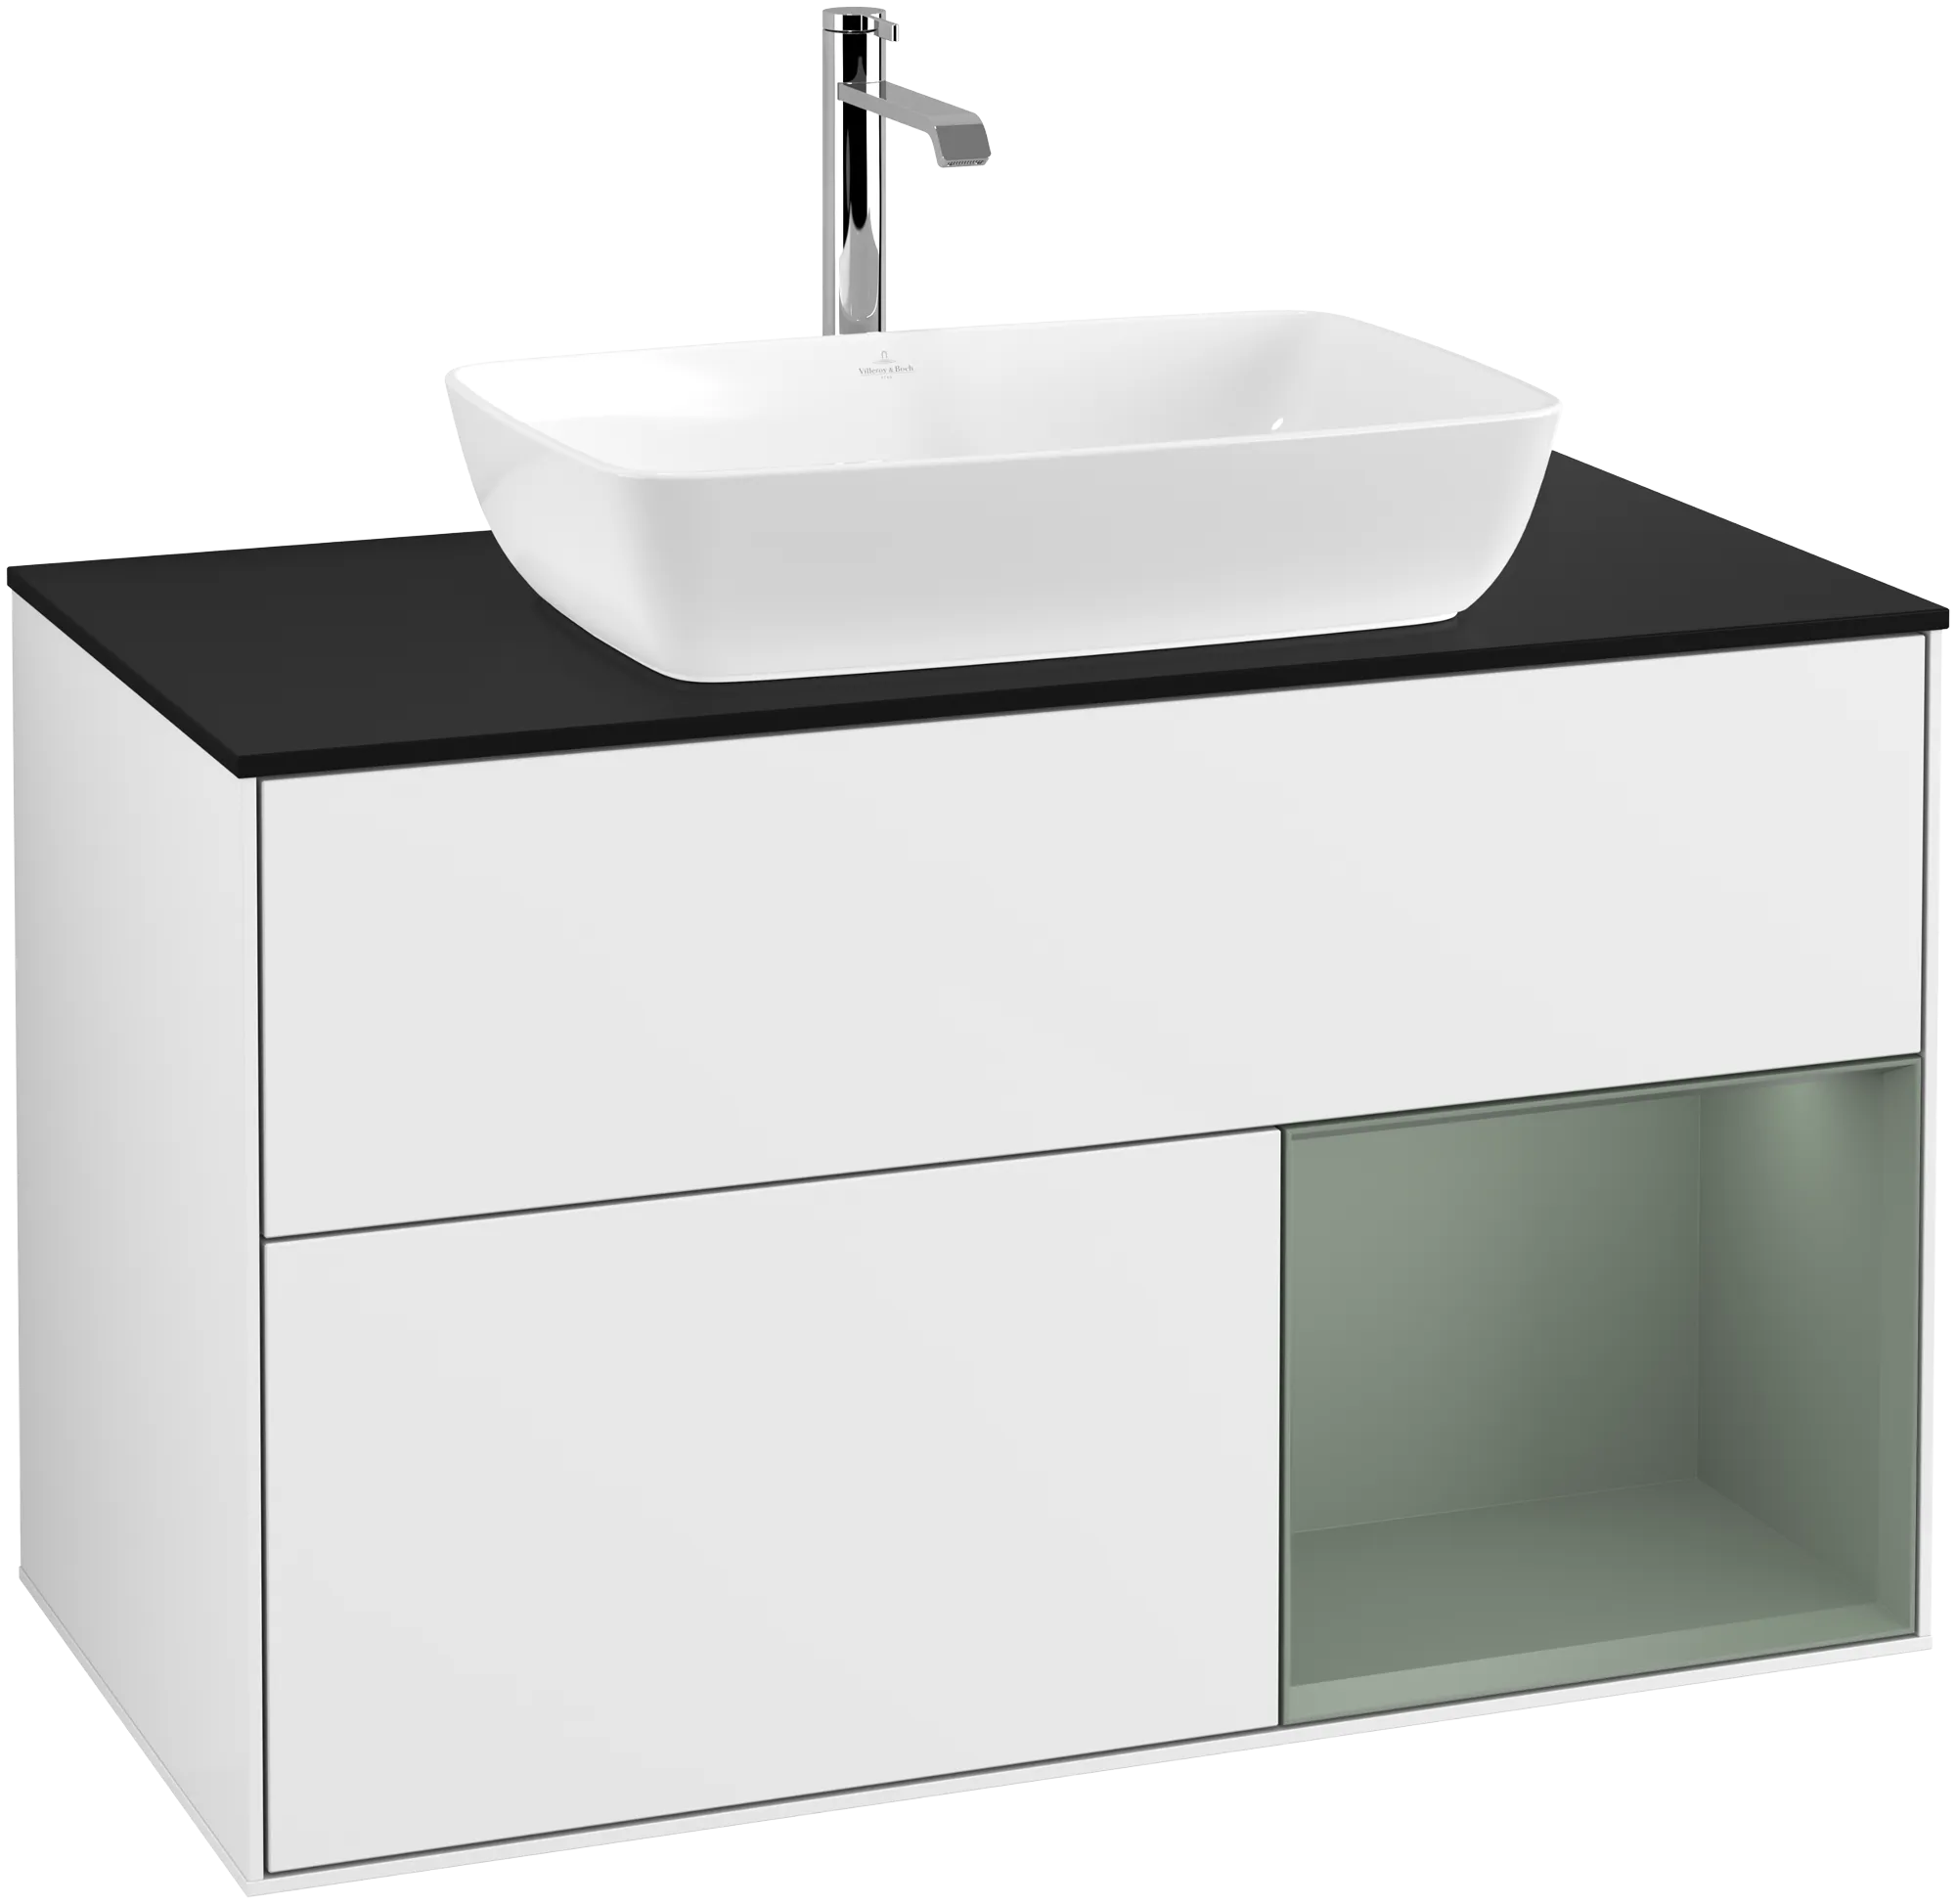 Зображення з  VILLEROY BOCH Finion Vanity unit, with lighting, 2 pull-out compartments, 1000 x 603 x 501 mm, Glossy White Lacquer / Olive Matt Lacquer / Glass Black Matt #G782GMGF